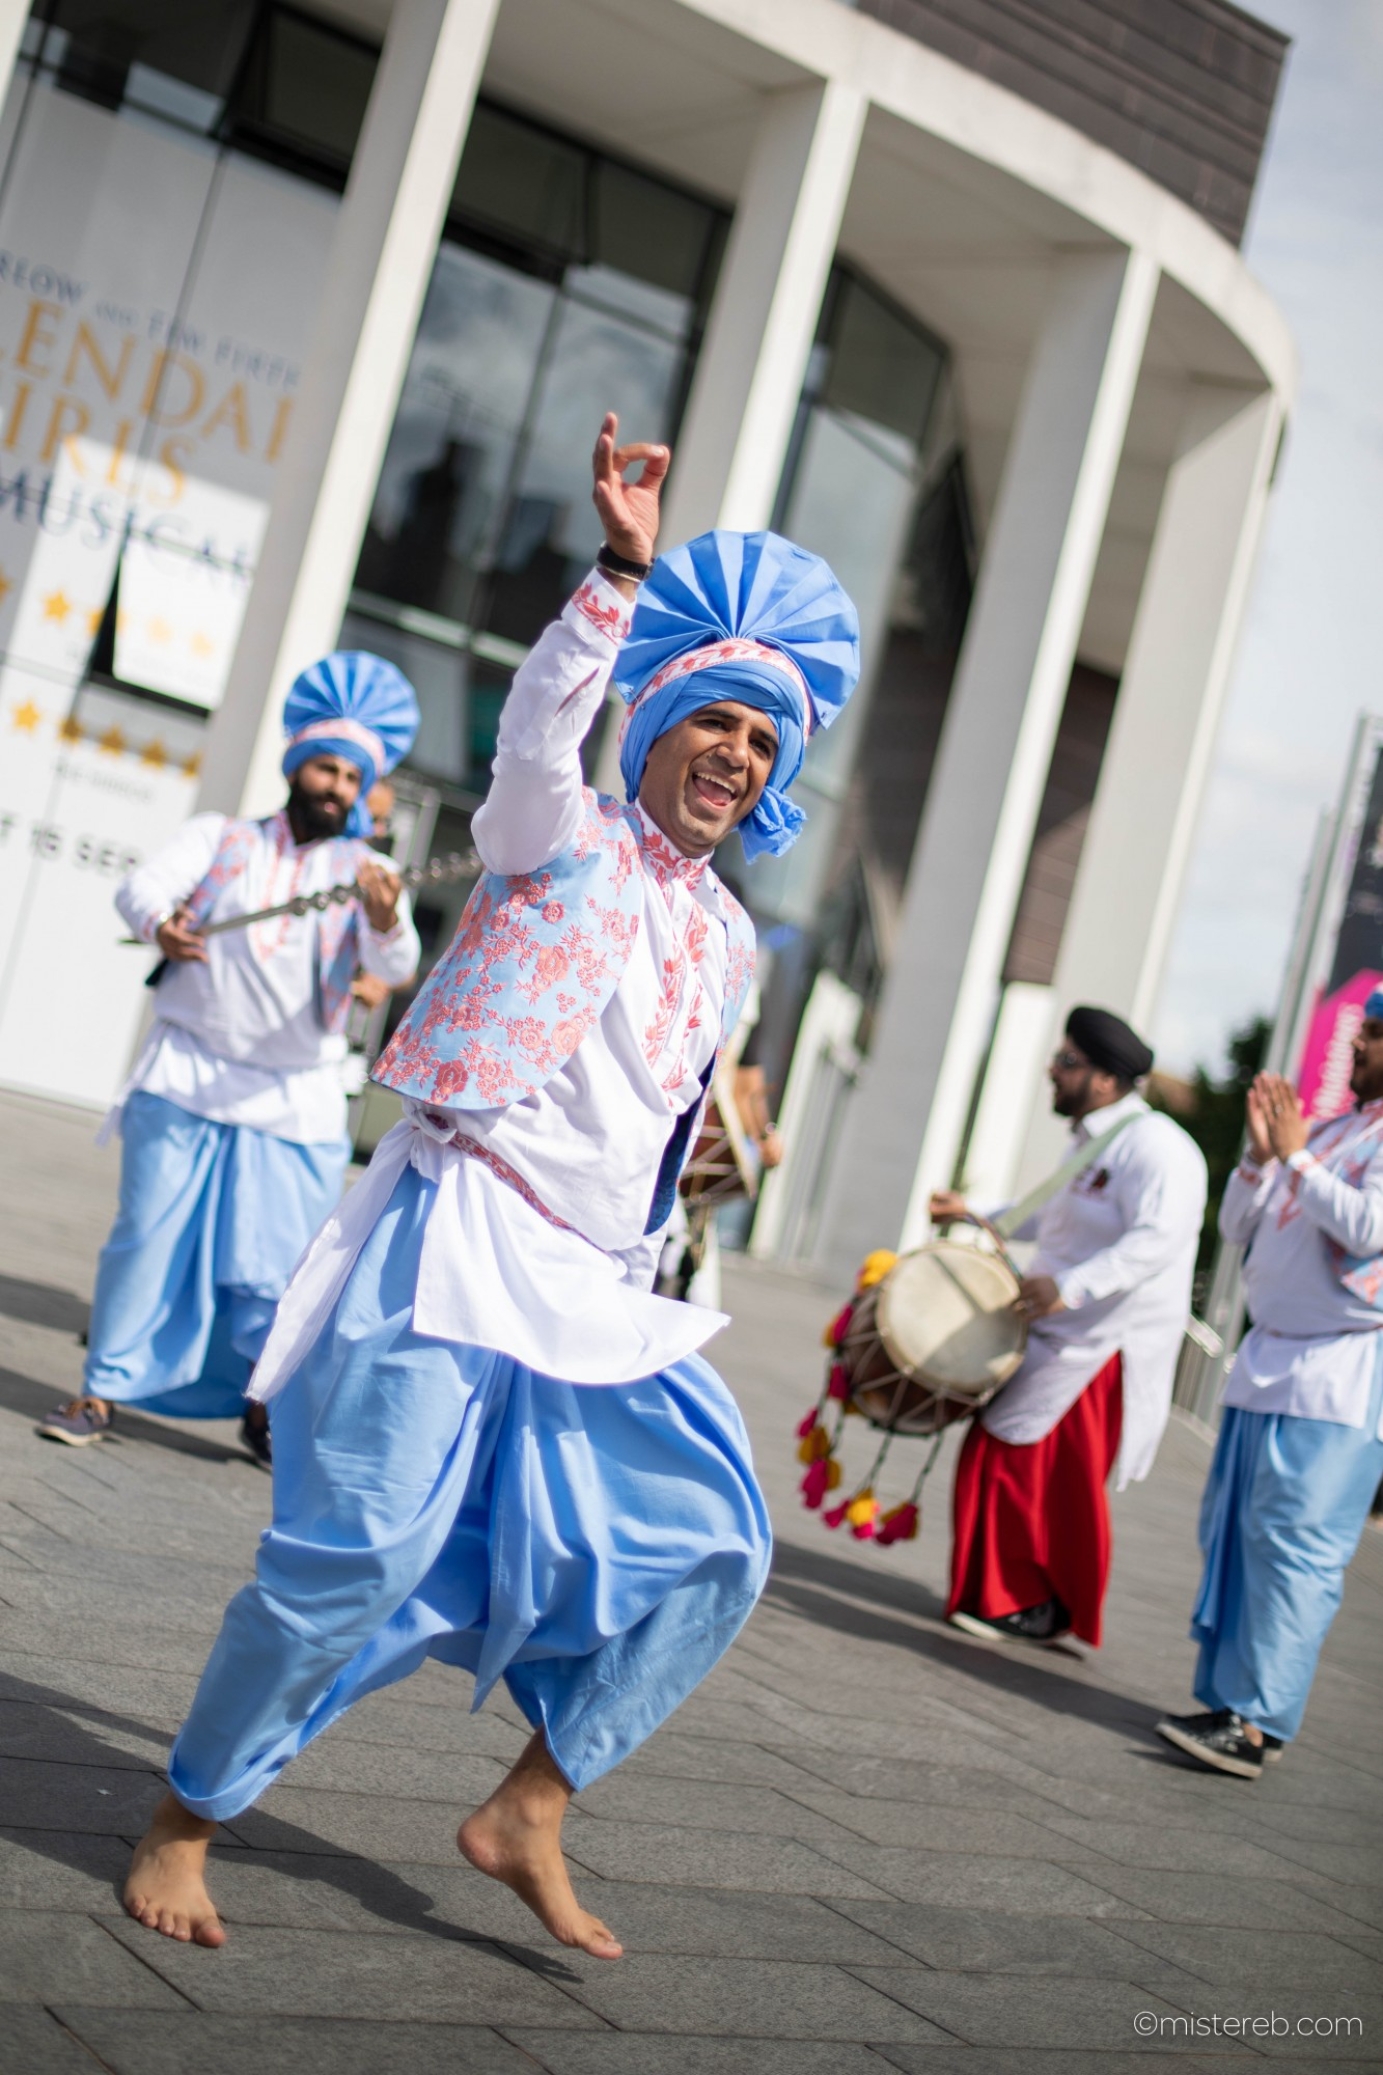 Press photo for 4x4 Bhangra by mistereb